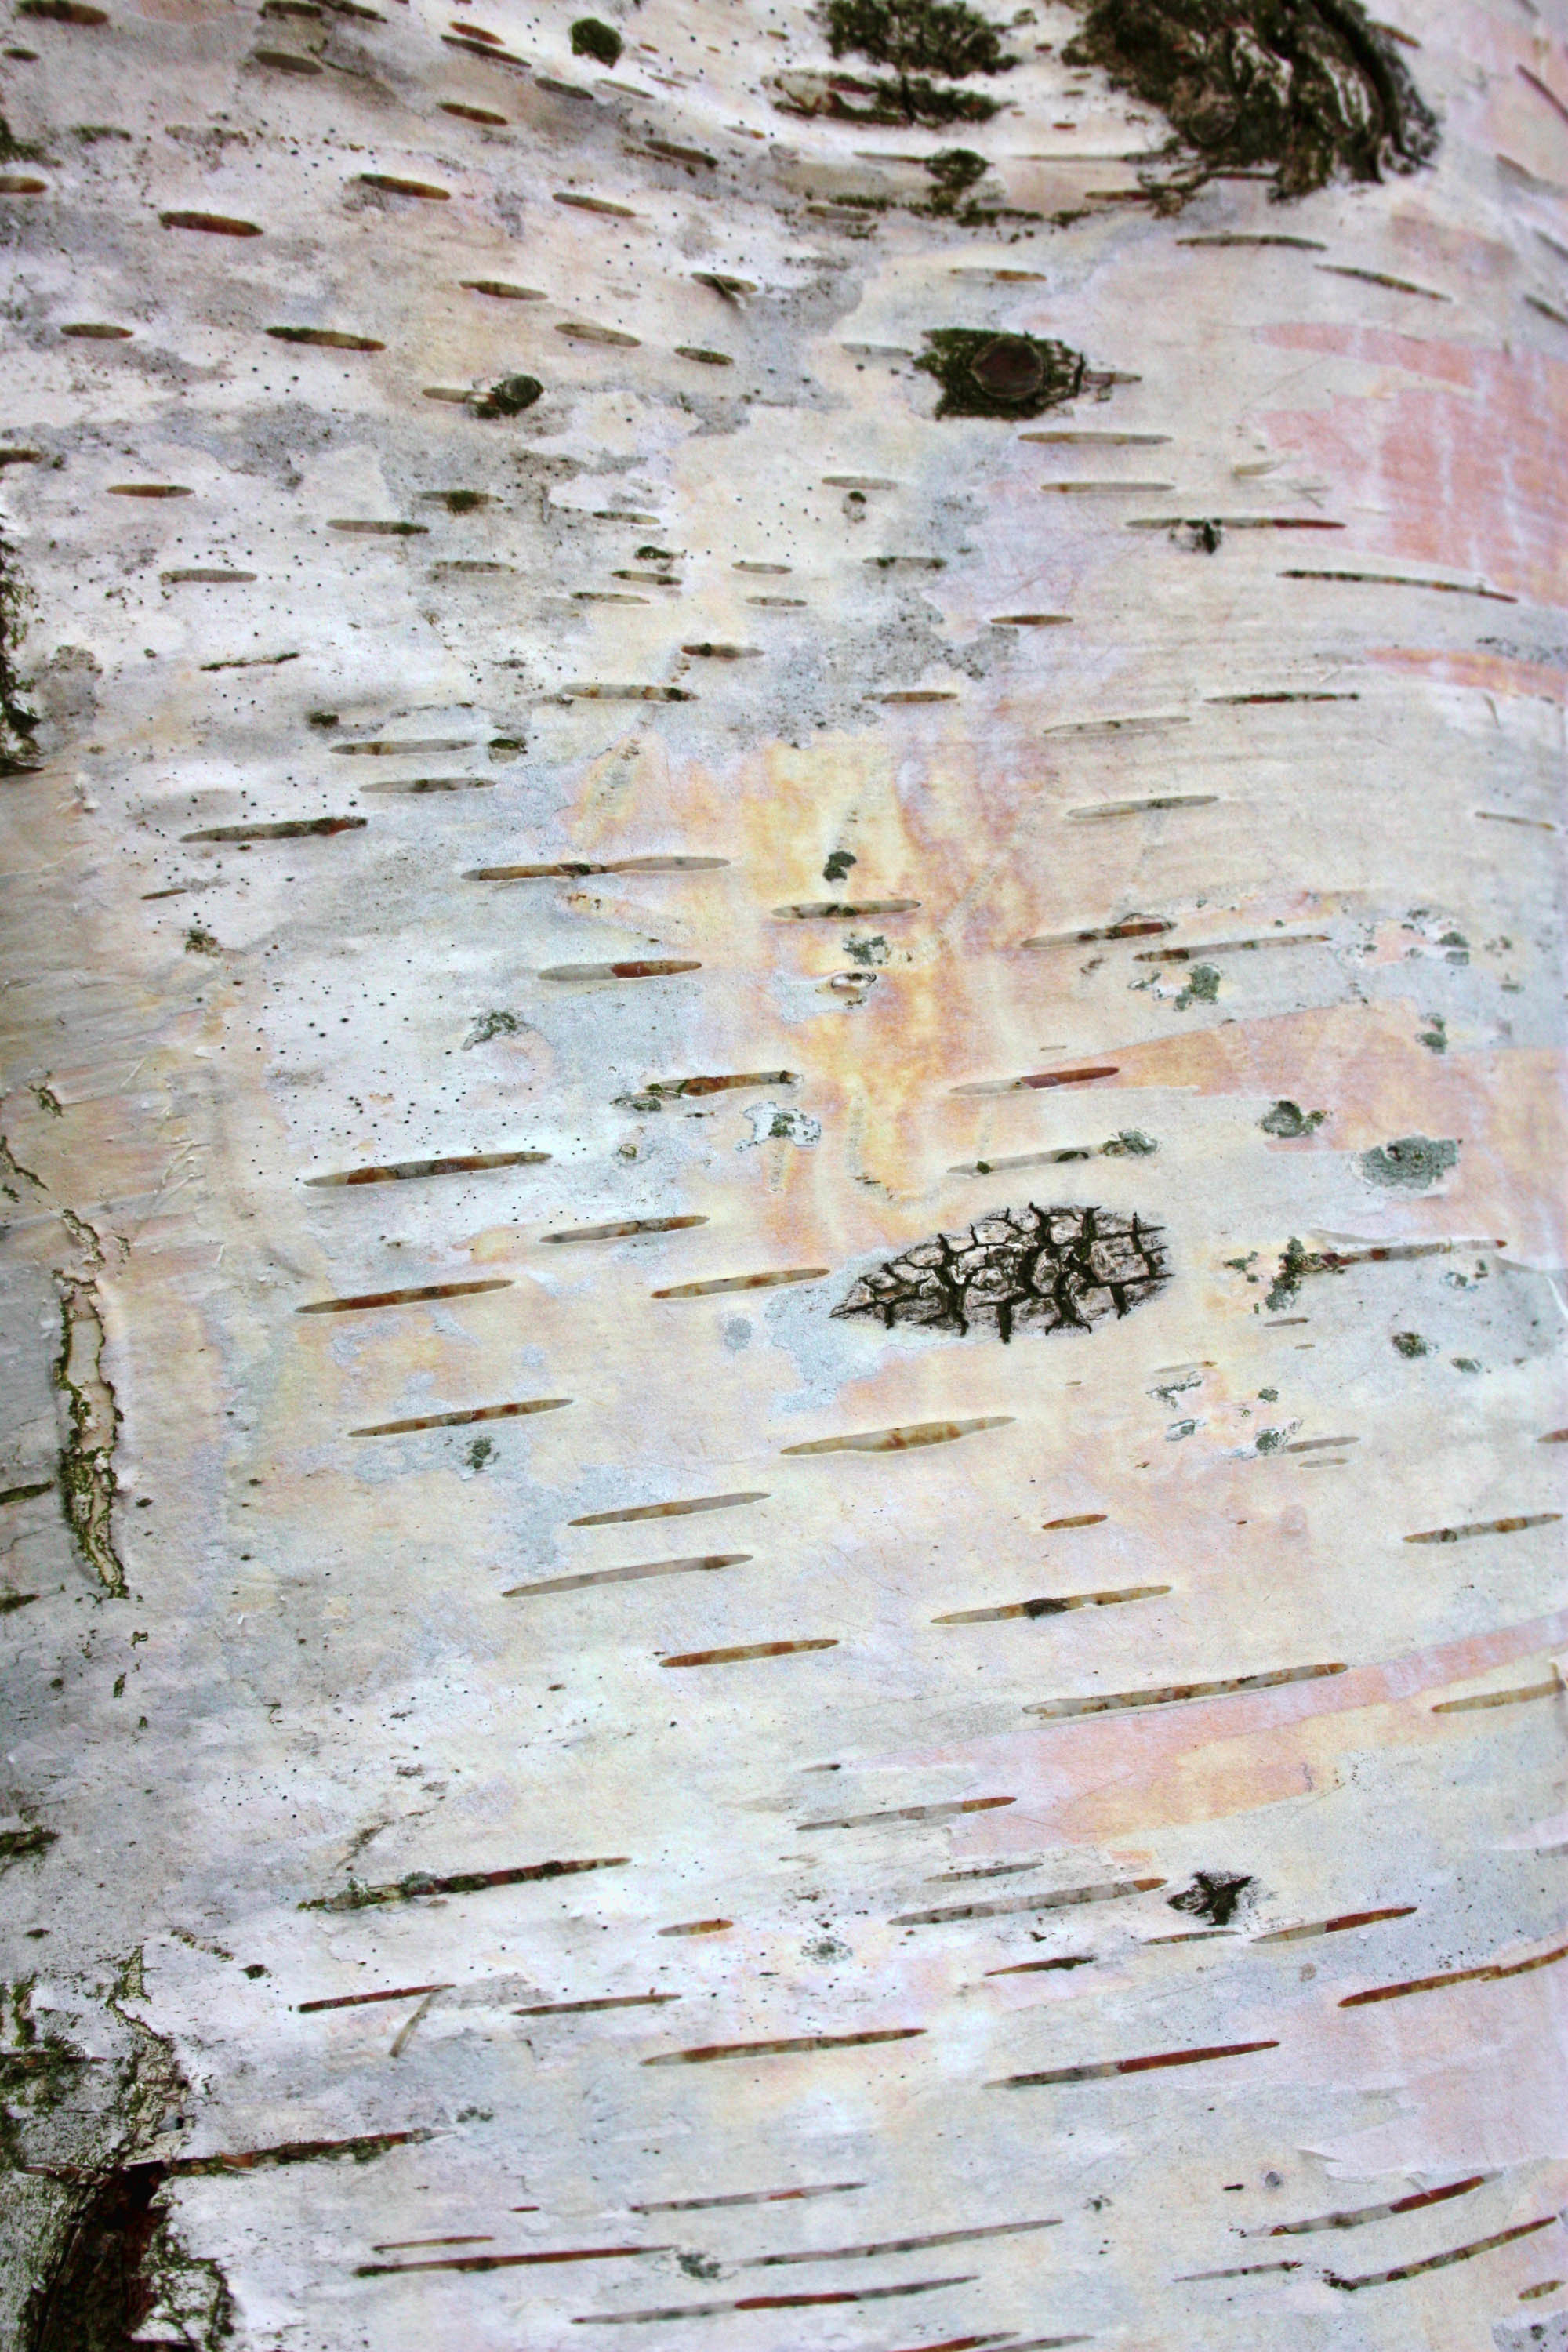 2000x3000 Silver birch bark texture photo | Free Textures from .